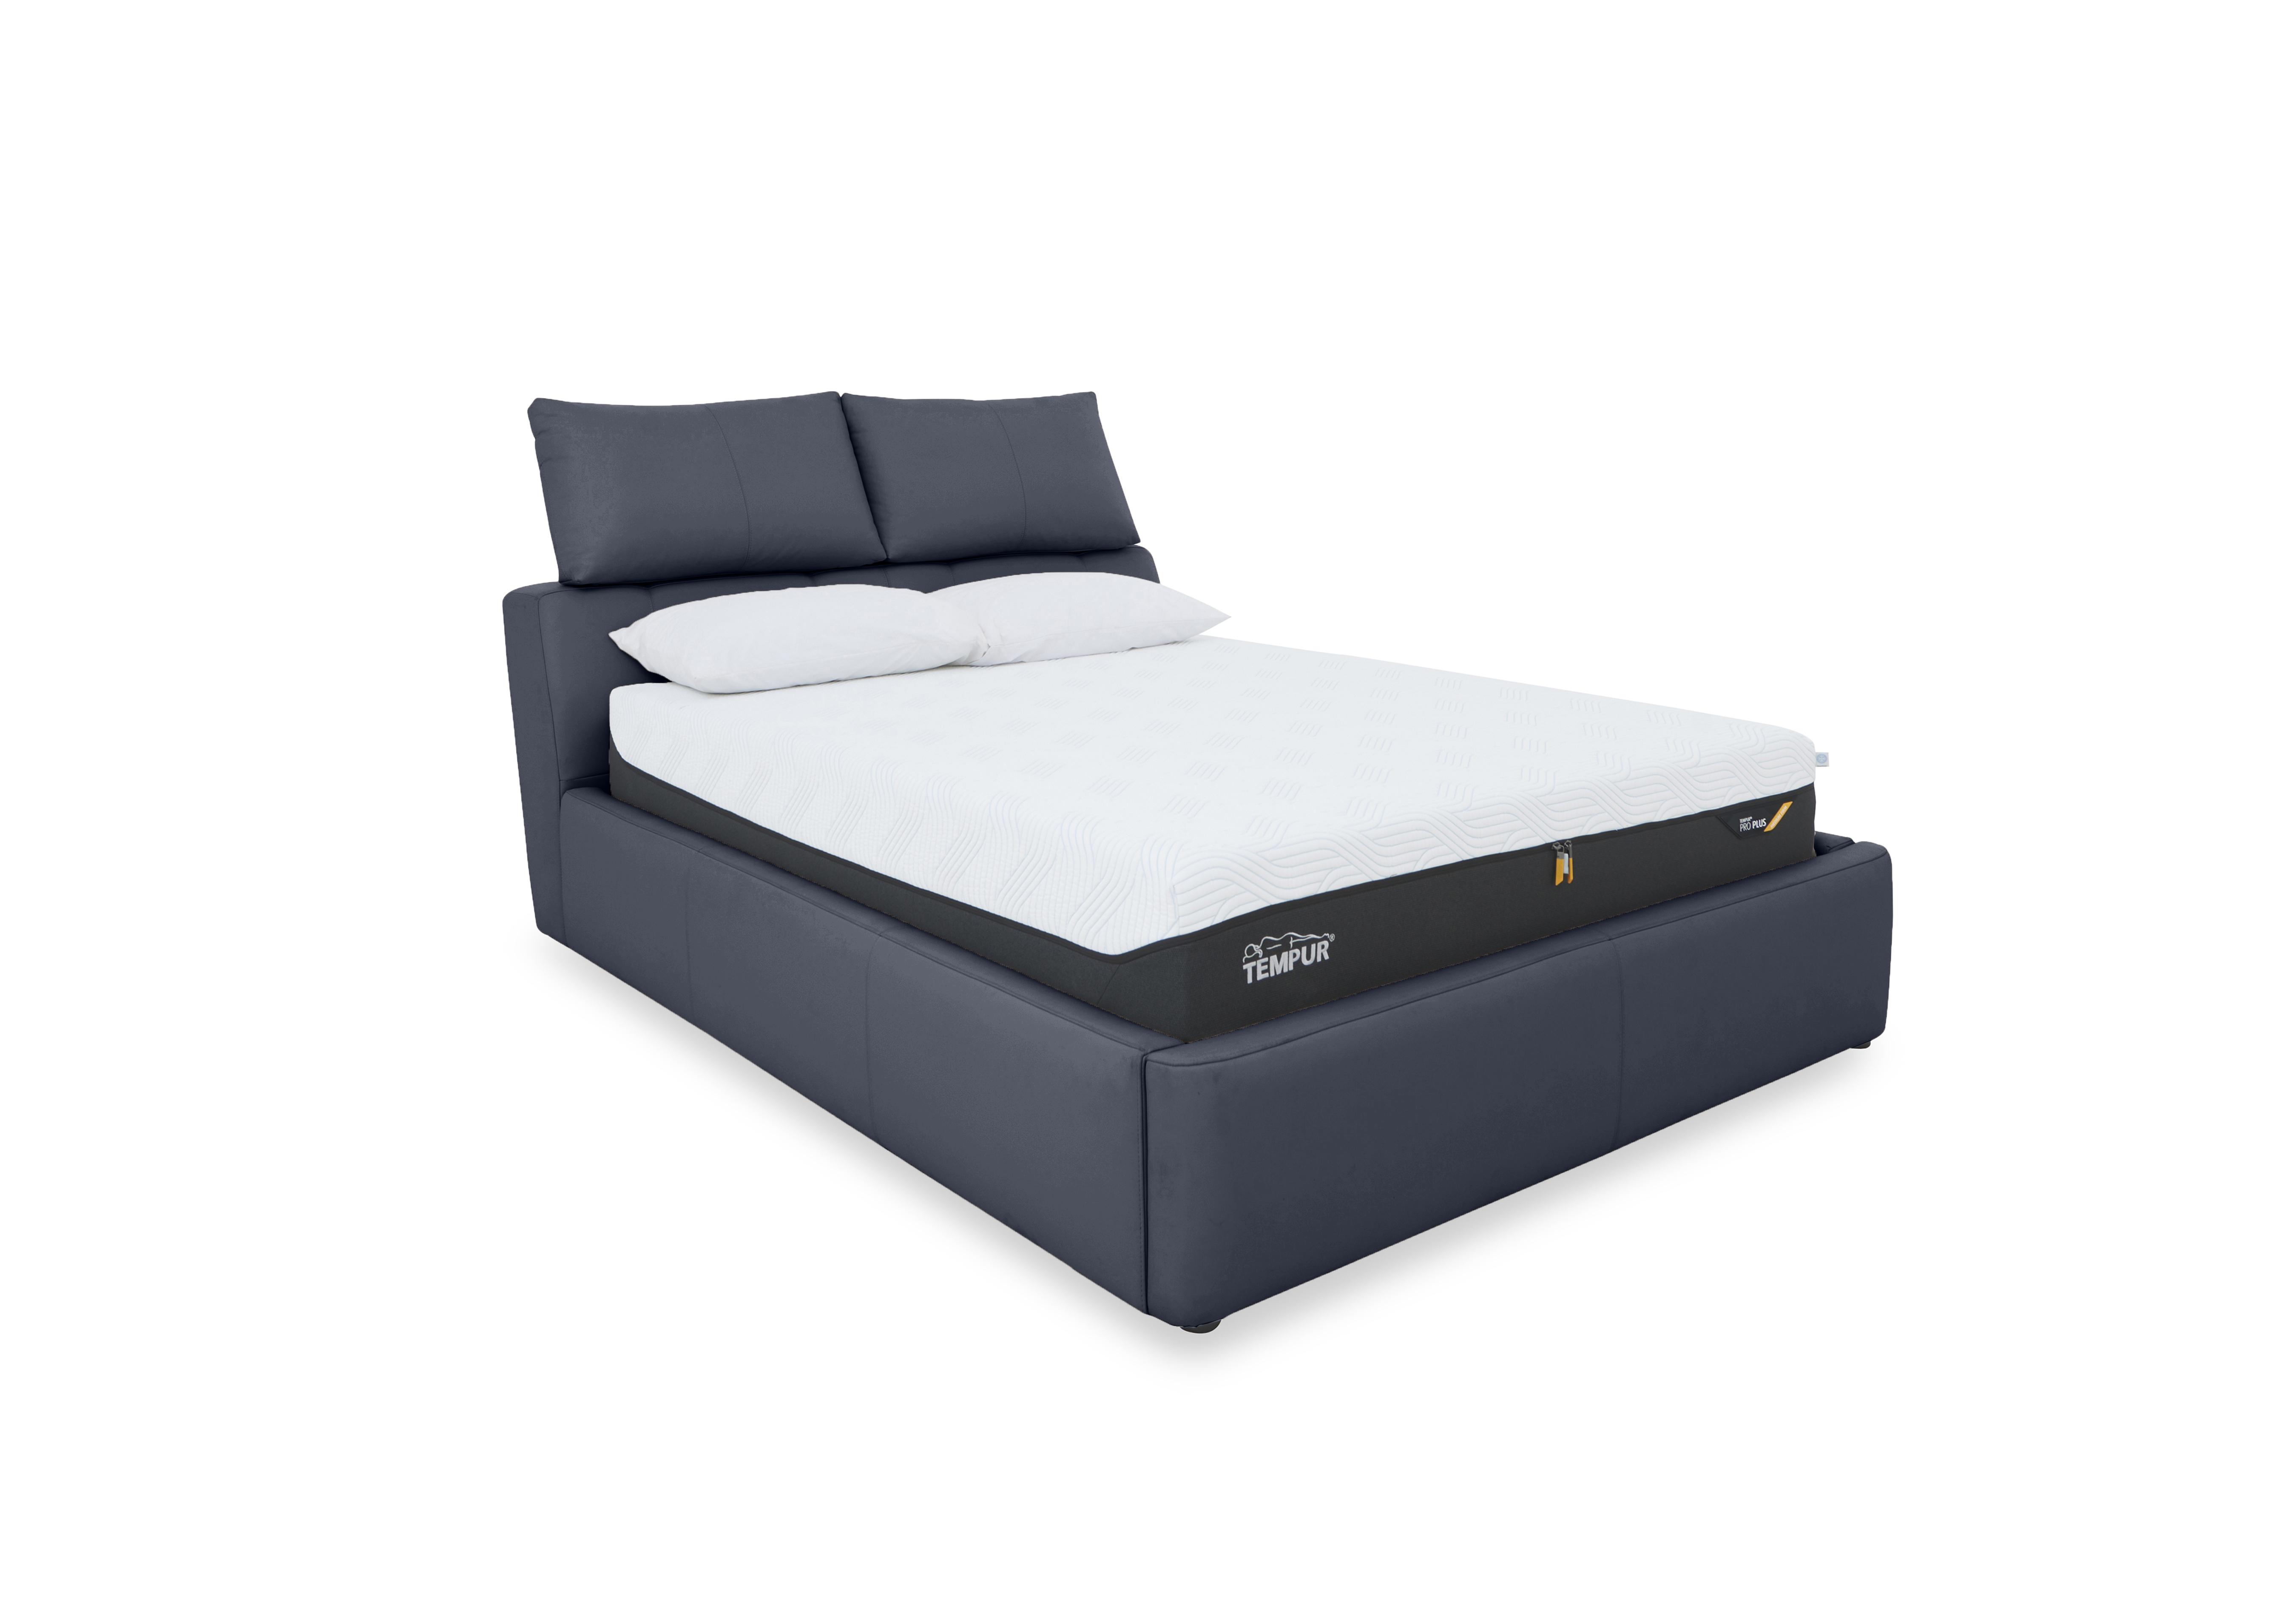 Tyrell Leather Manual Ottoman Bed Frame in Bv-313e Ocean Blue on Furniture Village